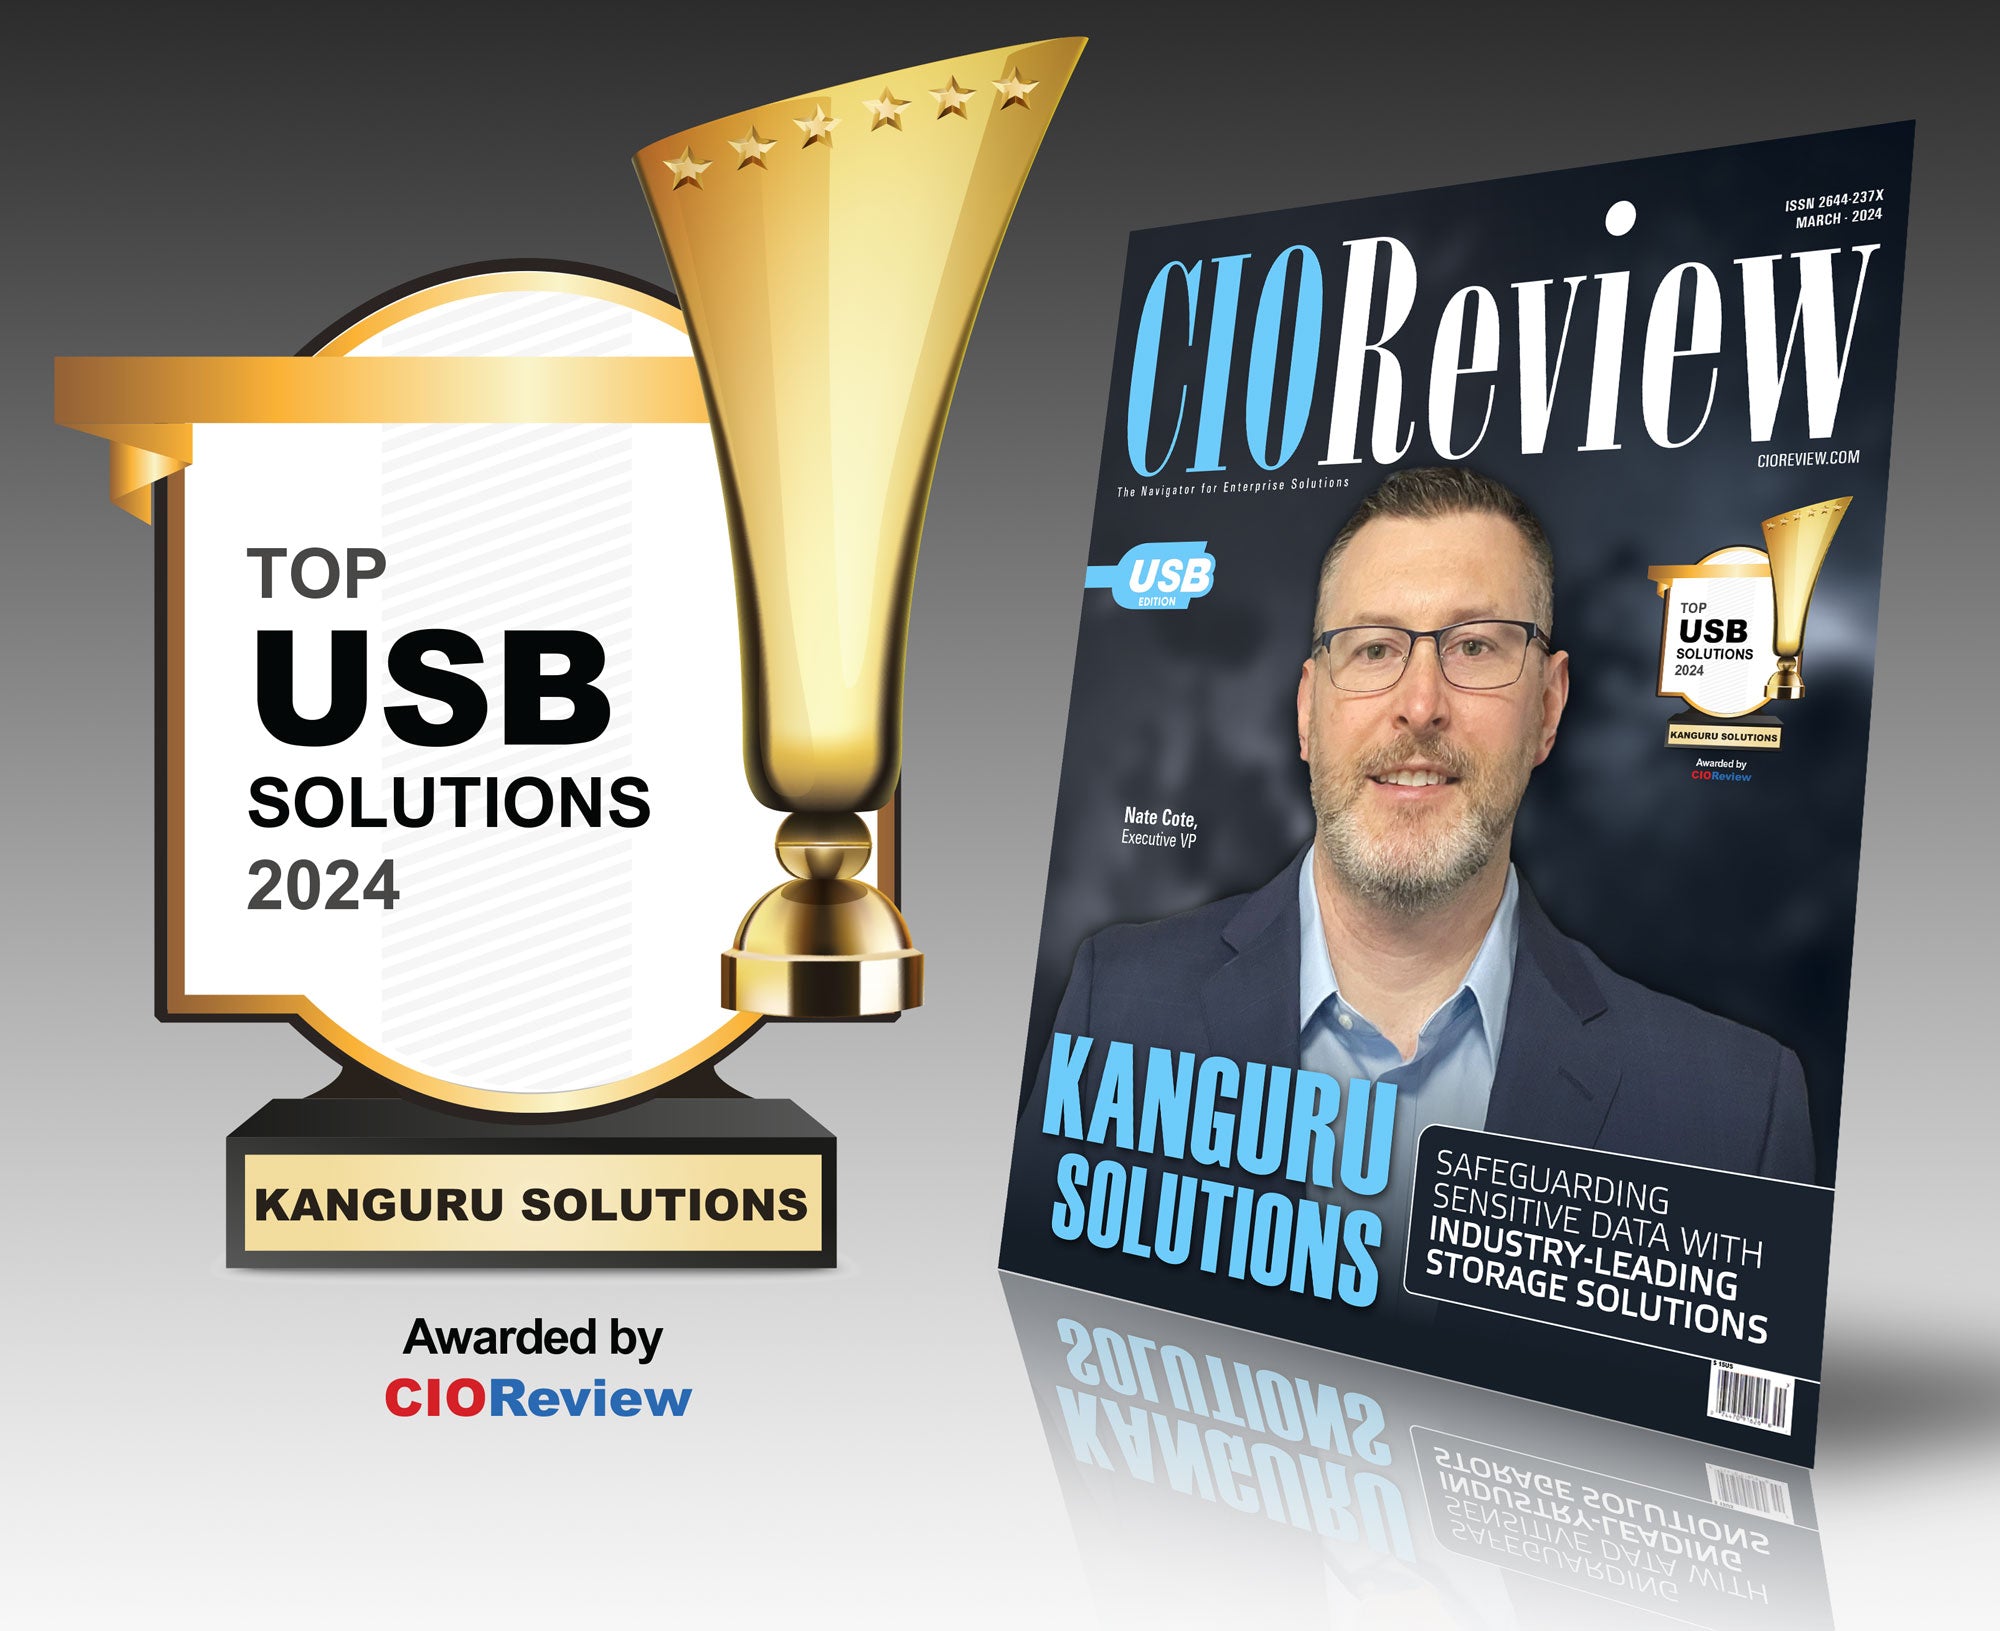 Kanguru receives Top USB Solutions 2024, Awarded by CIOReview